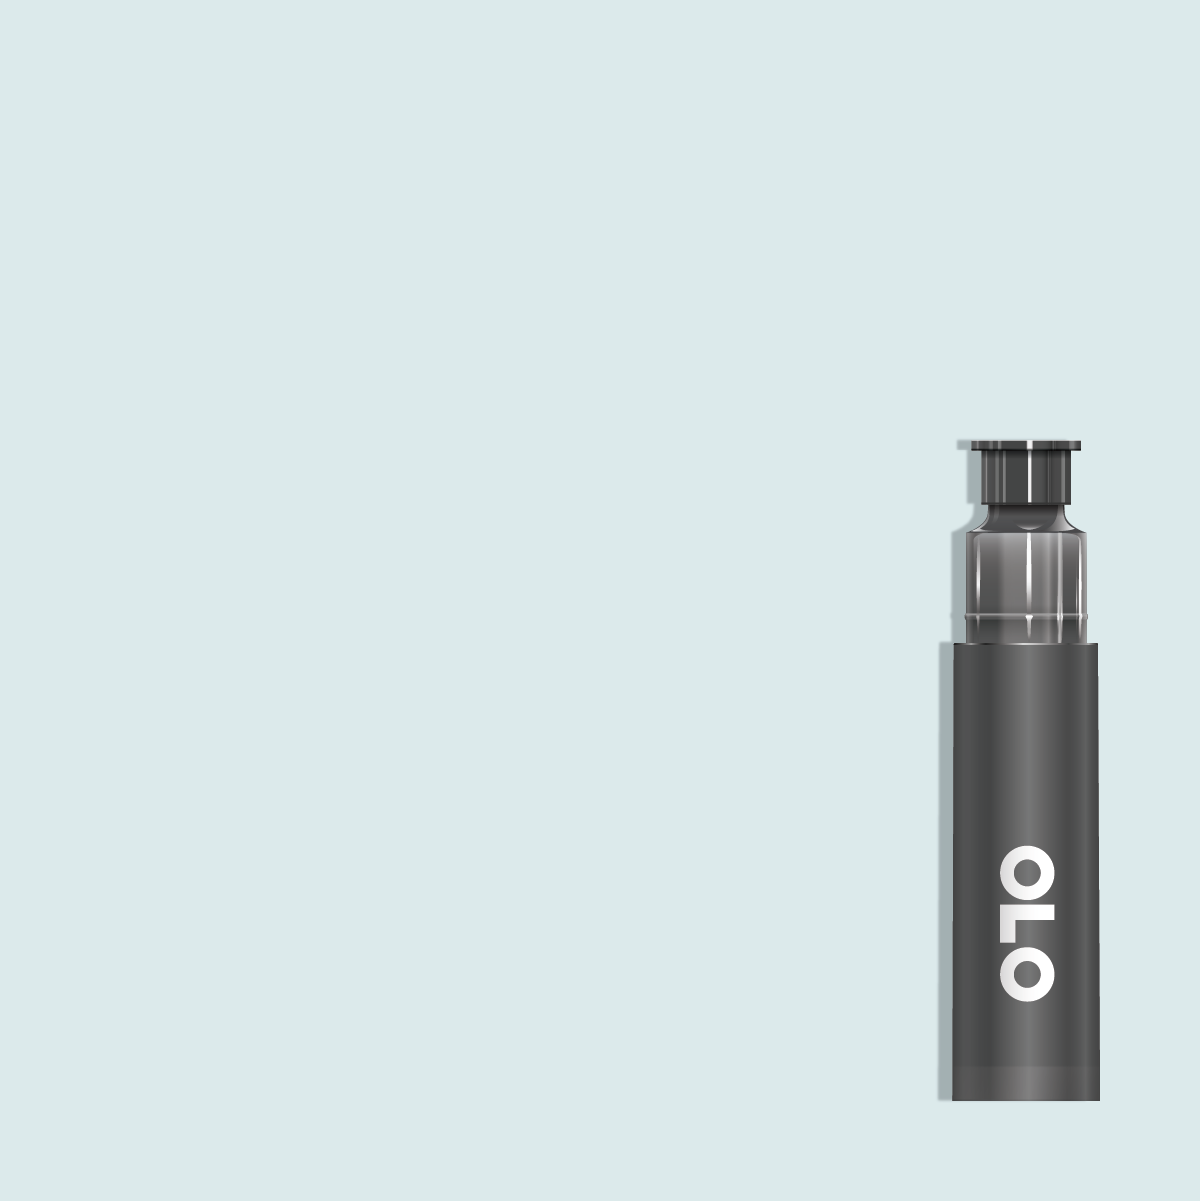 OLO BG7.0 Forest Mist Replacement Cartridge